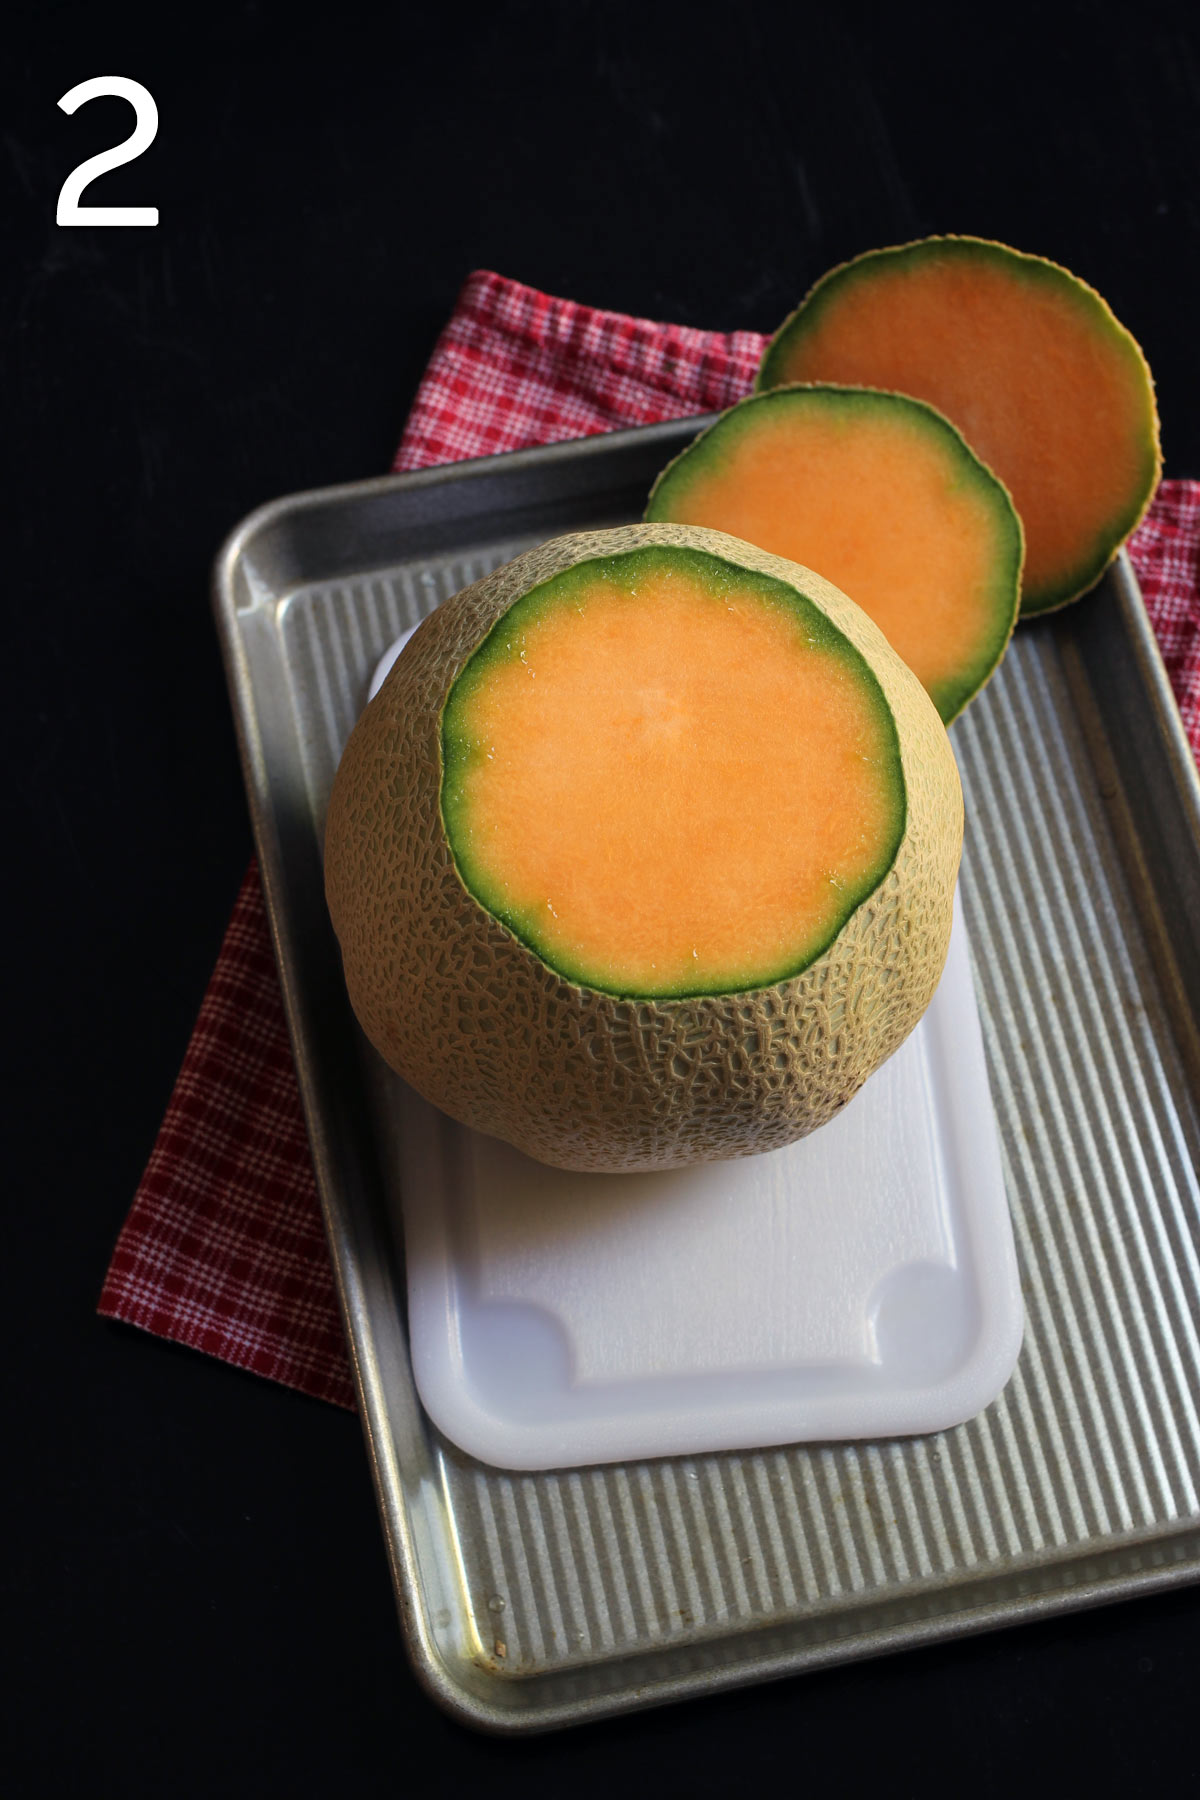 melon with ends cut off standing upright on cutting board within sheet pan.